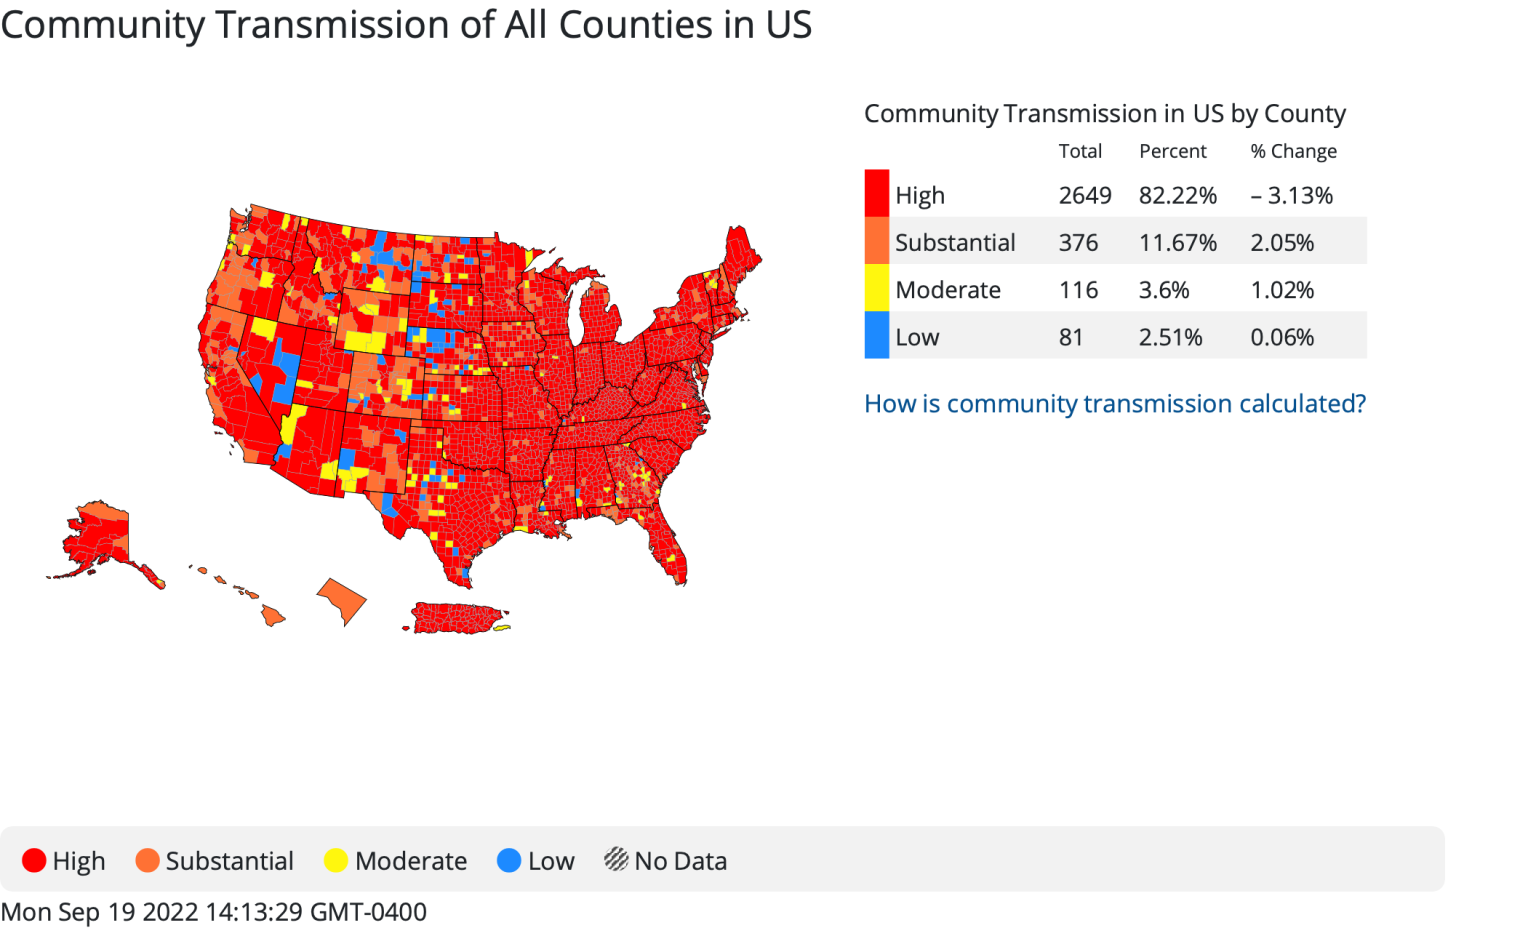 US_Community_Transmission_of_All_Counties-1536x928.png